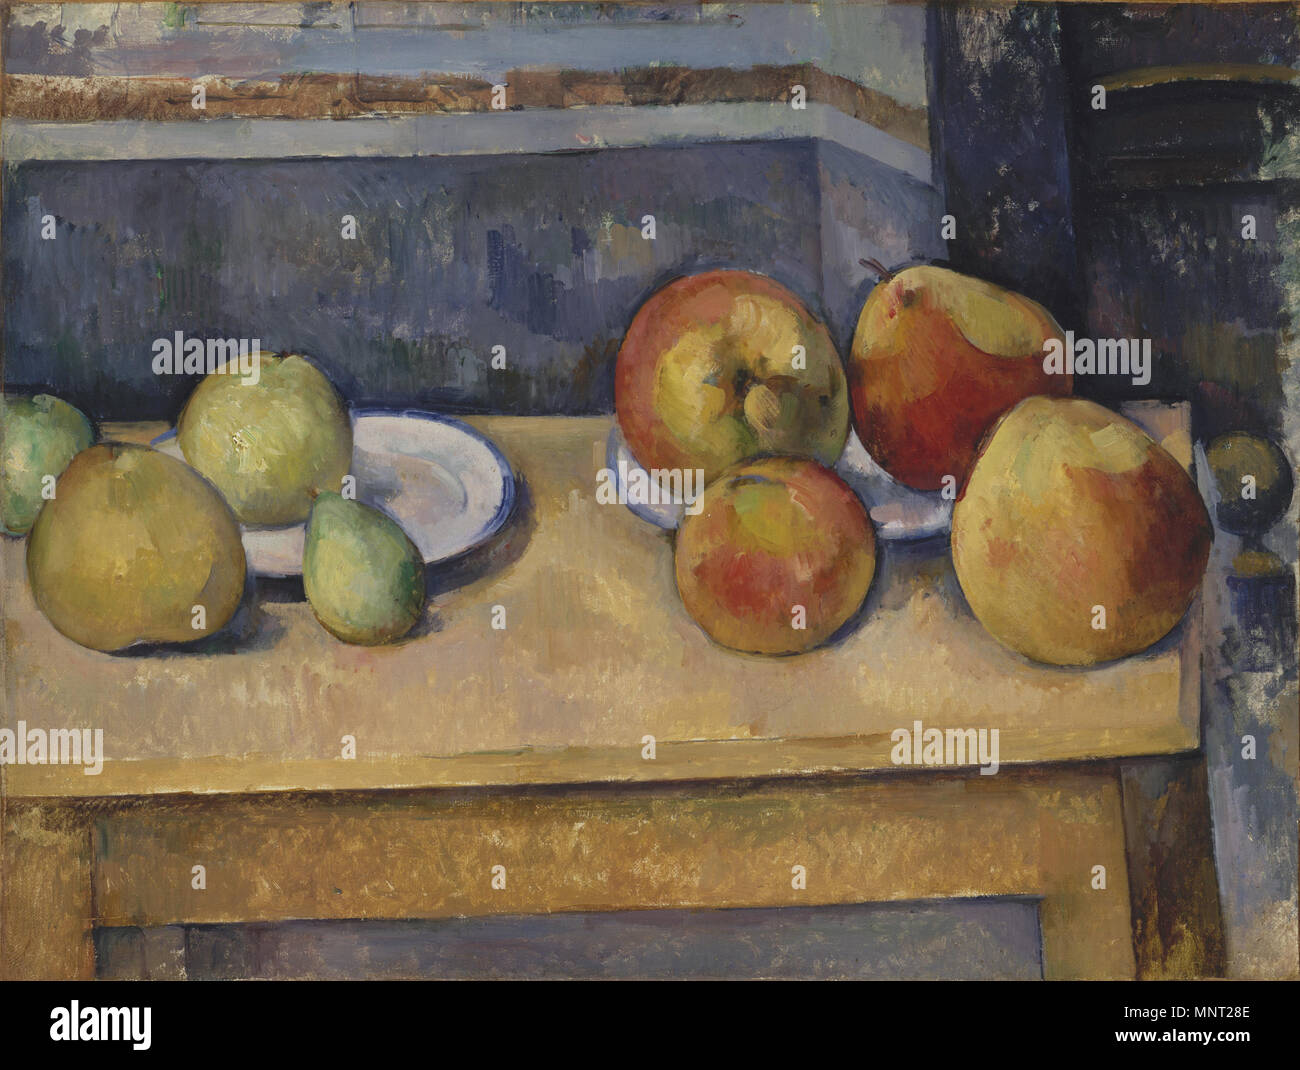 965 Paul Cézanne - Still Life with Apples and Pears Stock Photo